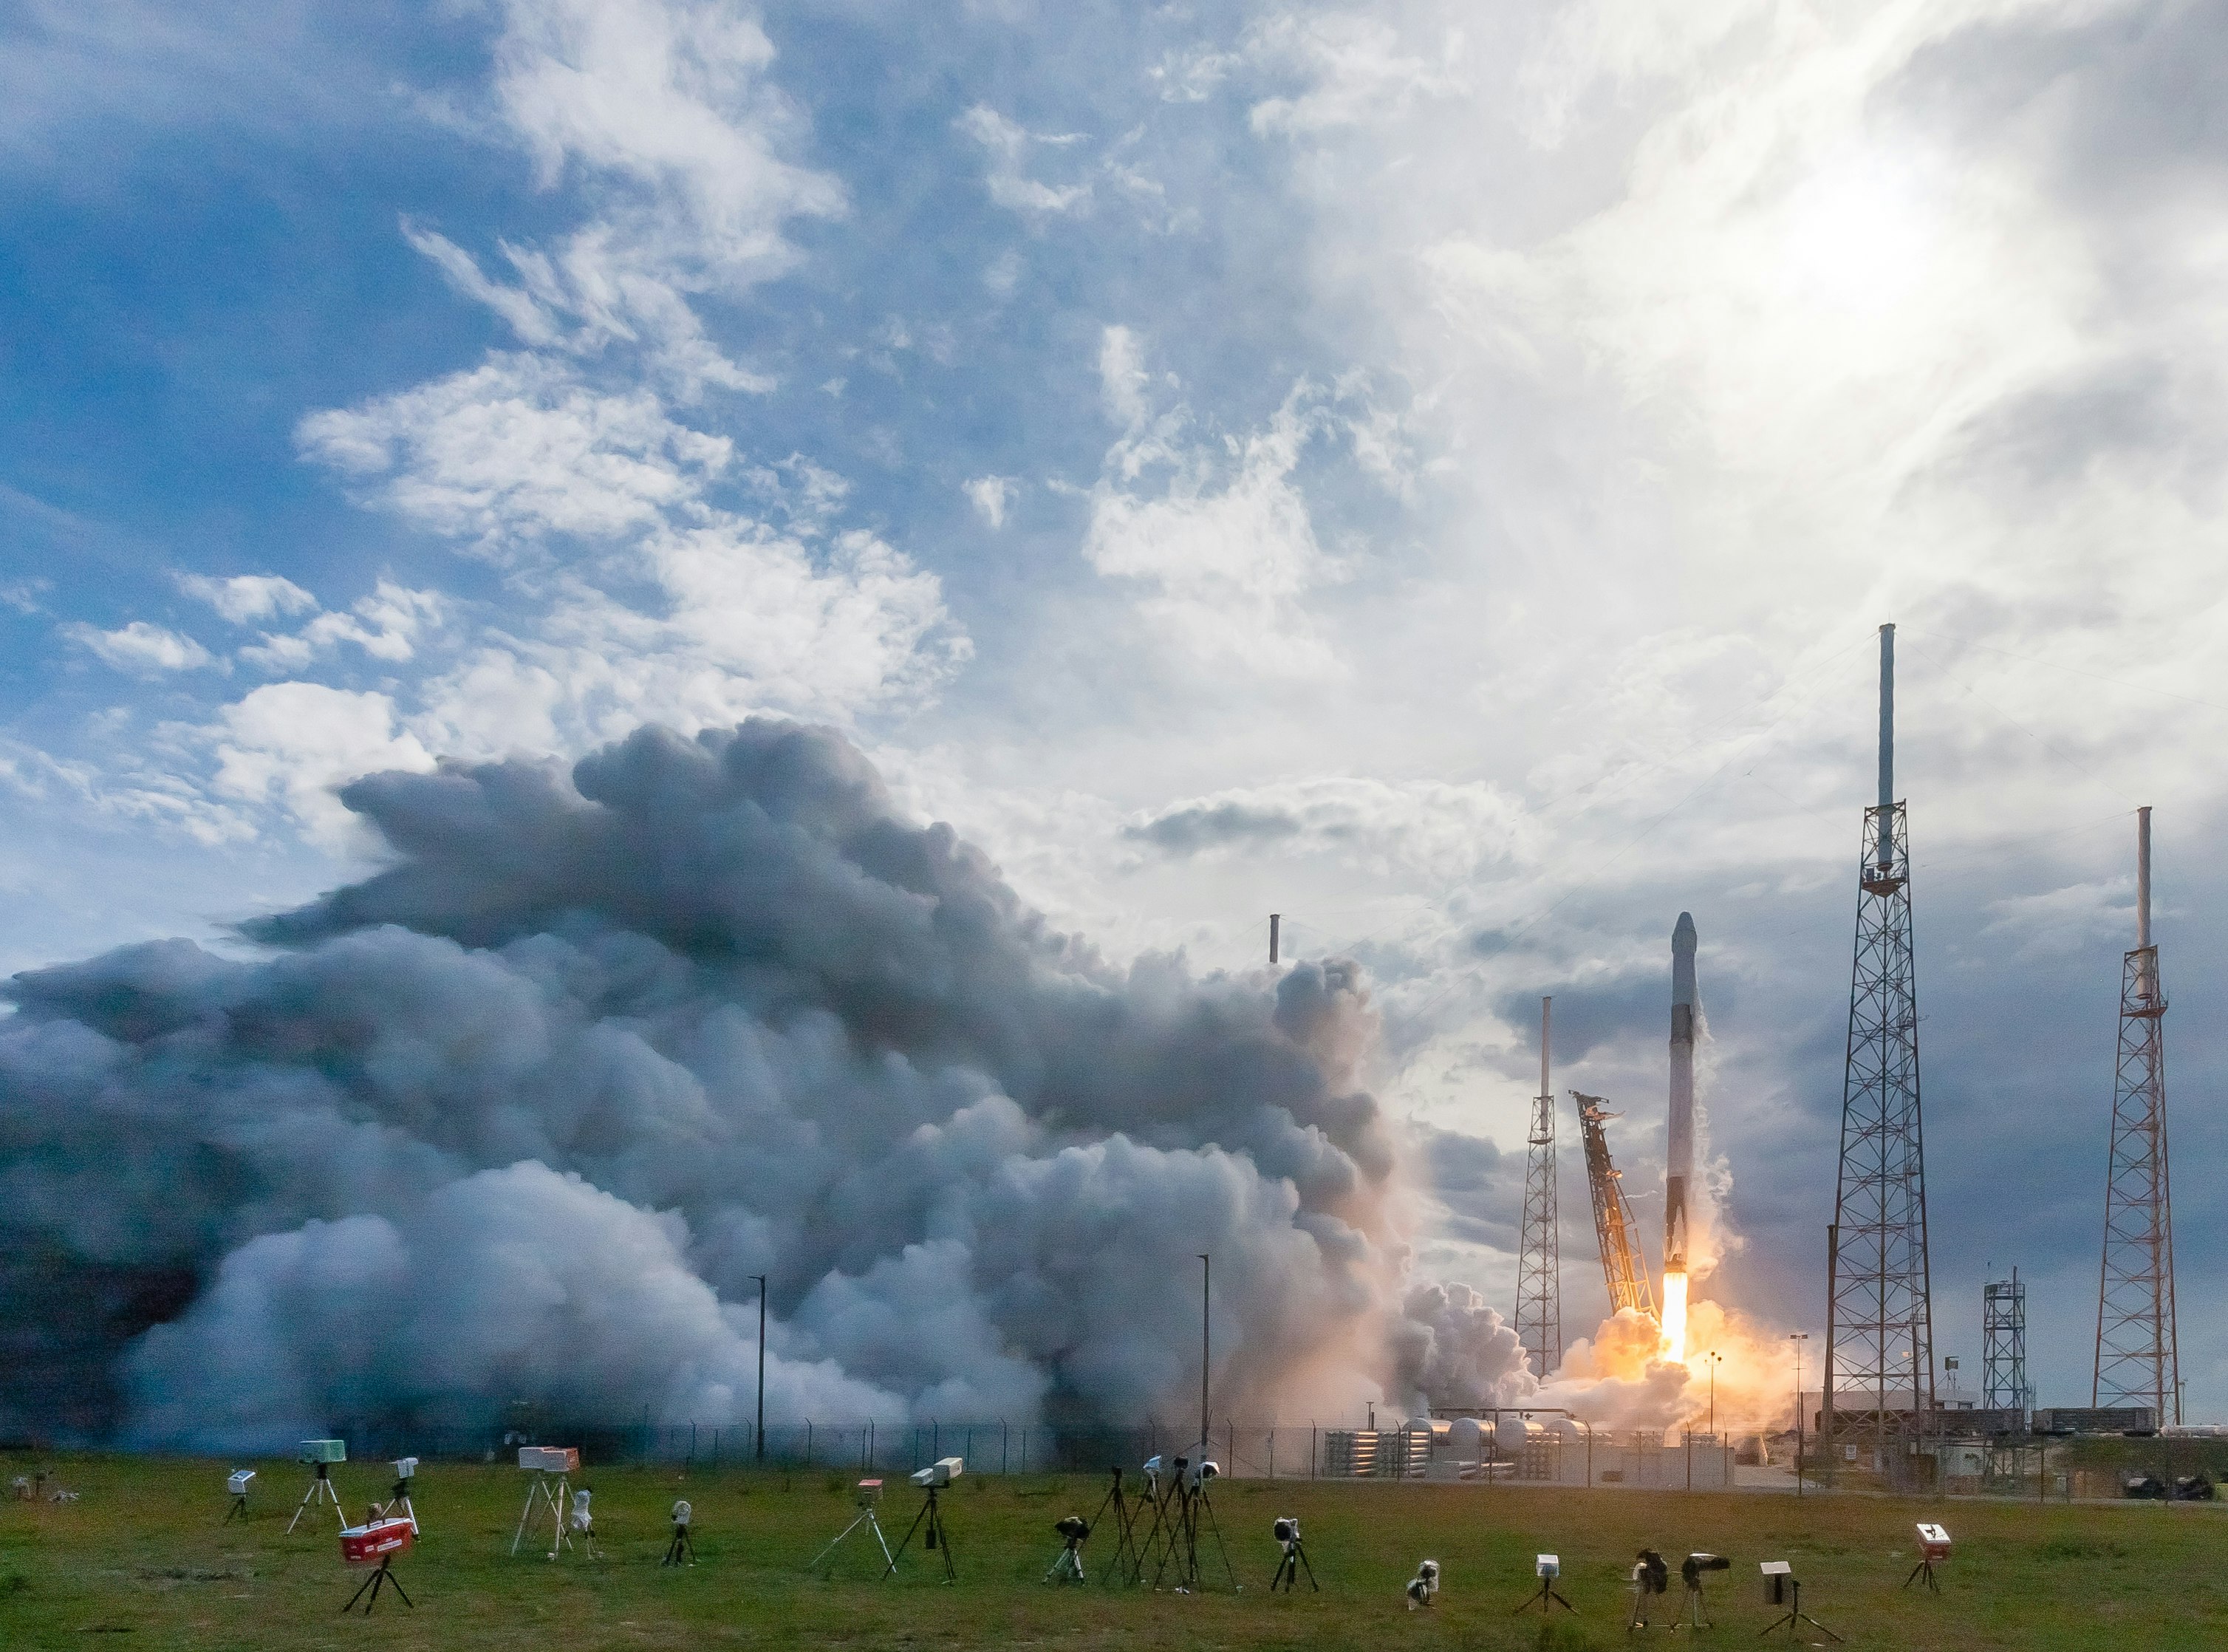 The launch of the 14th SpaceX Resupply Mission to the International Space Station was scheduled at 4:30 PM. This meant the photographers were going to be setting up our remote cameras and having to deal with the setting sun behind the rocket. In the foreground of this image, you can see a line of Rube-Goldberg designed boxes designed to protect camera gear from weather and rocket exhaust. In the top right, the sun is partially blocked by some cumulus clouds.